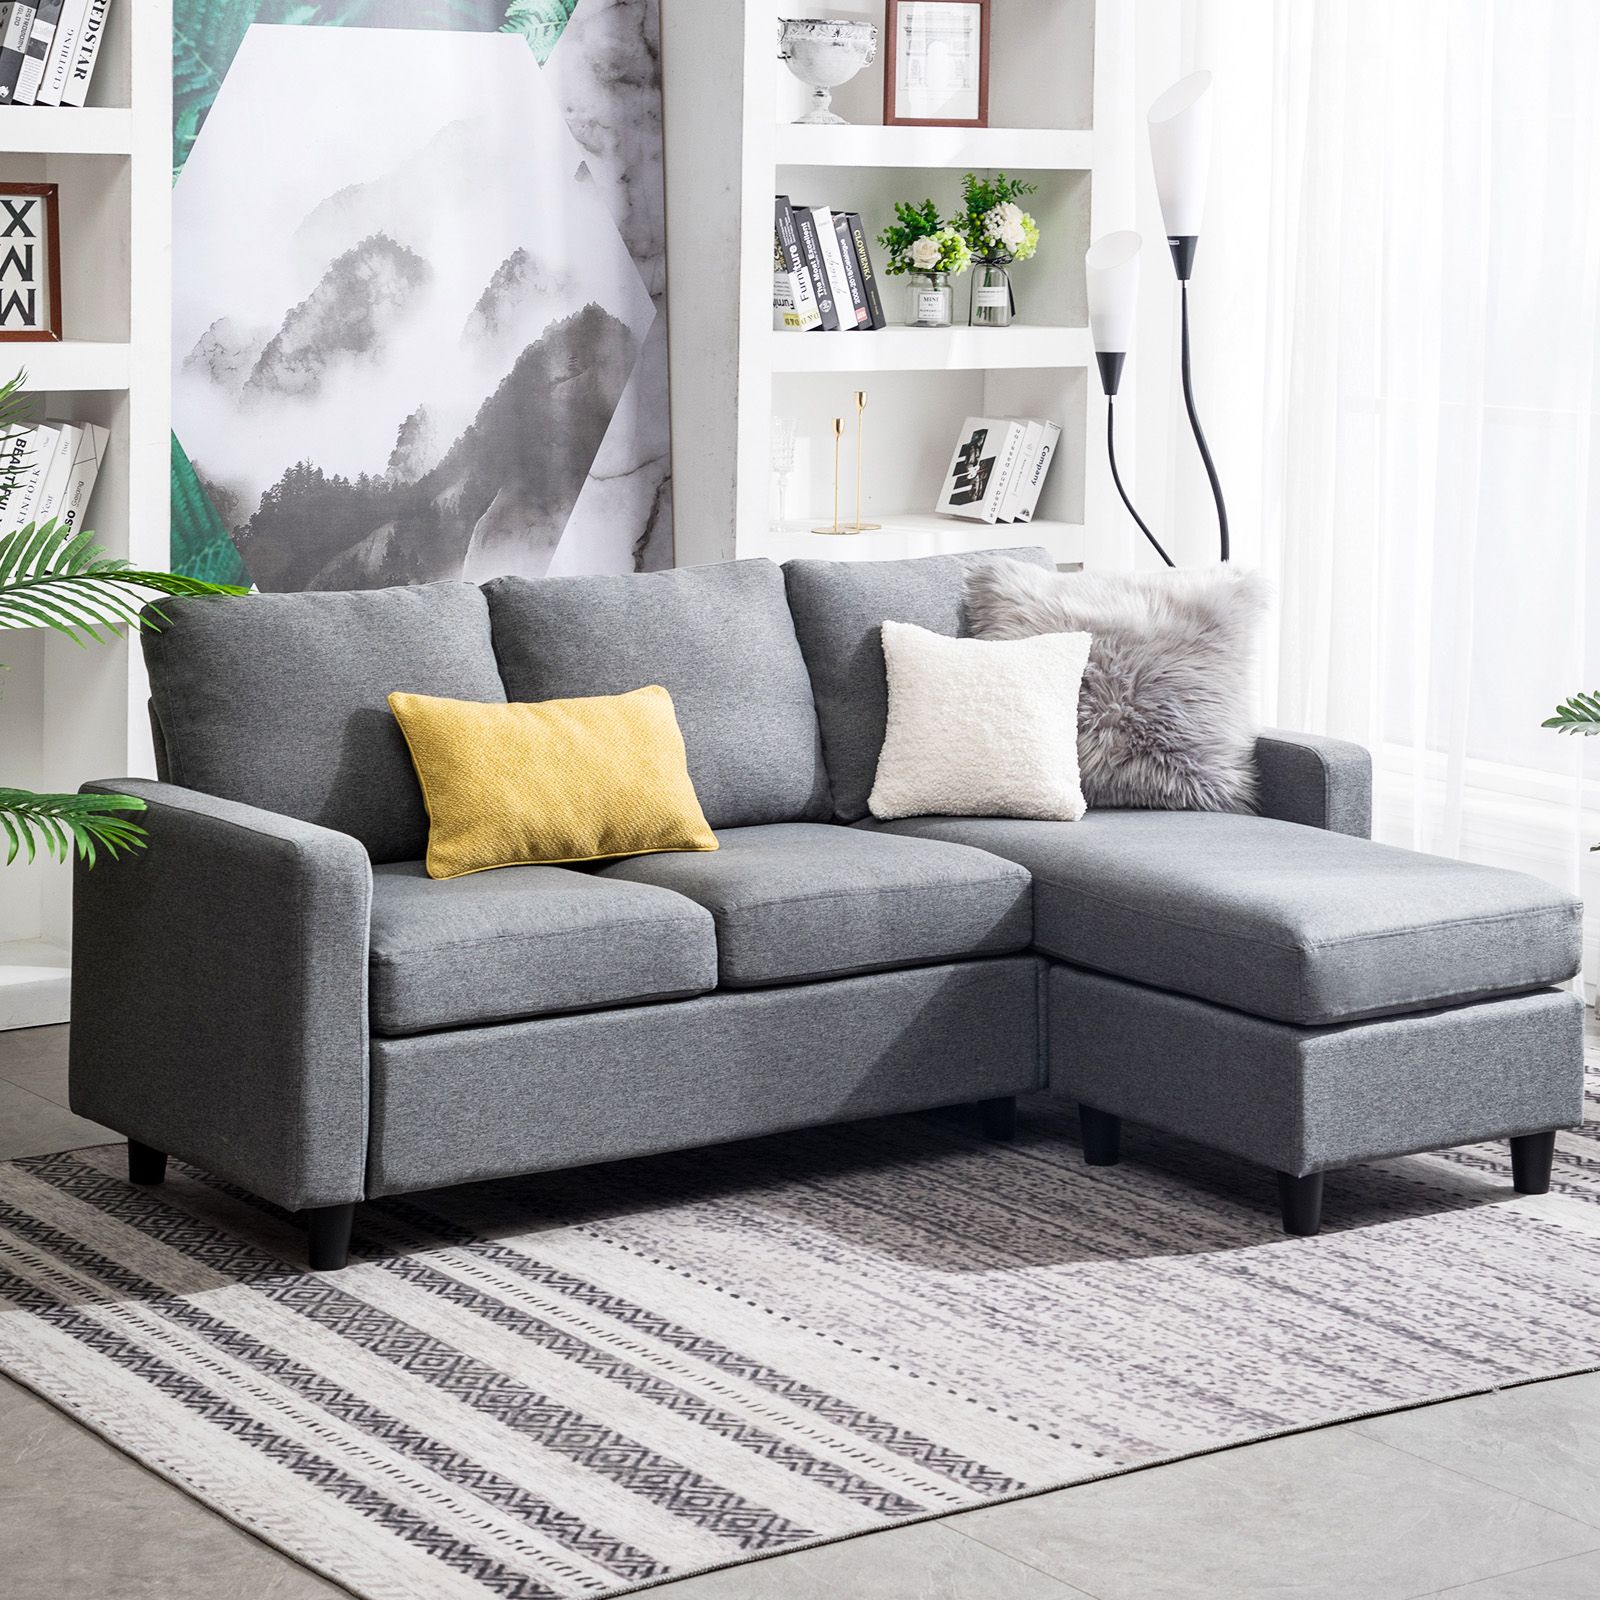 Grey Sectional Sofa L Shaped Couch W/reversible Chaise For Small Space Regarding L Shape Couches With Reversible Chaises (Gallery 4 of 20)